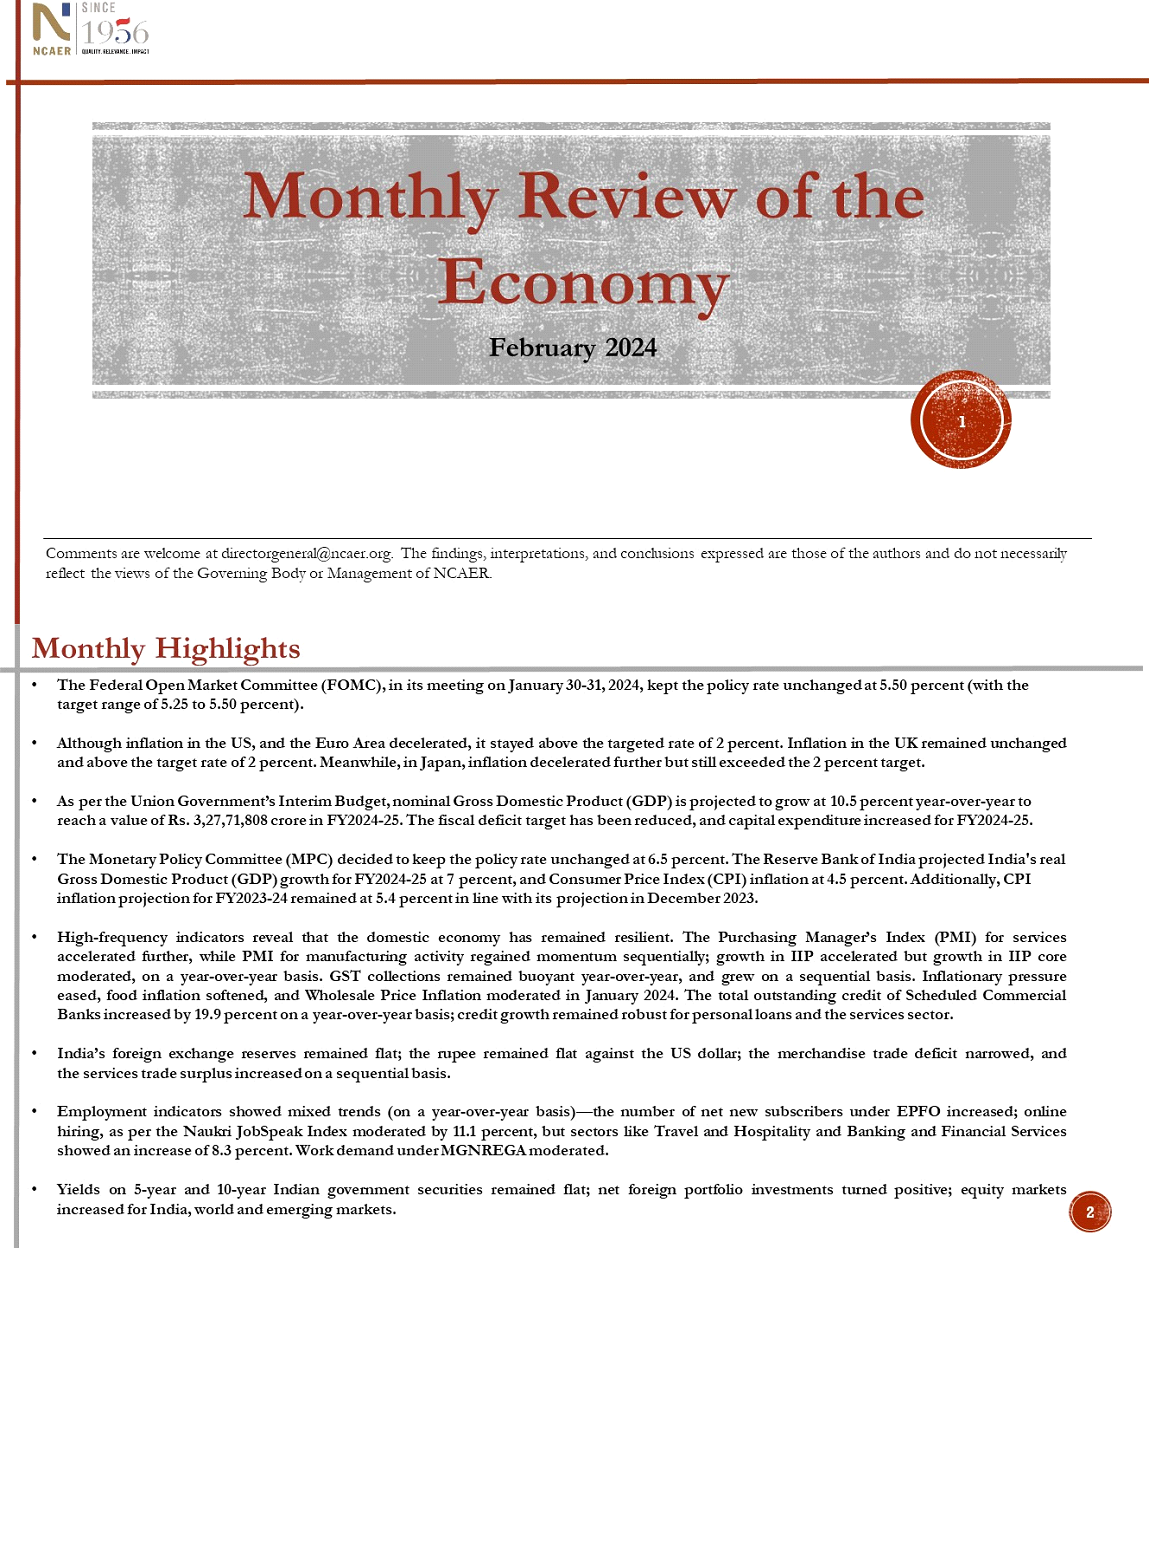 Monthly Review of the Economy – February 2024